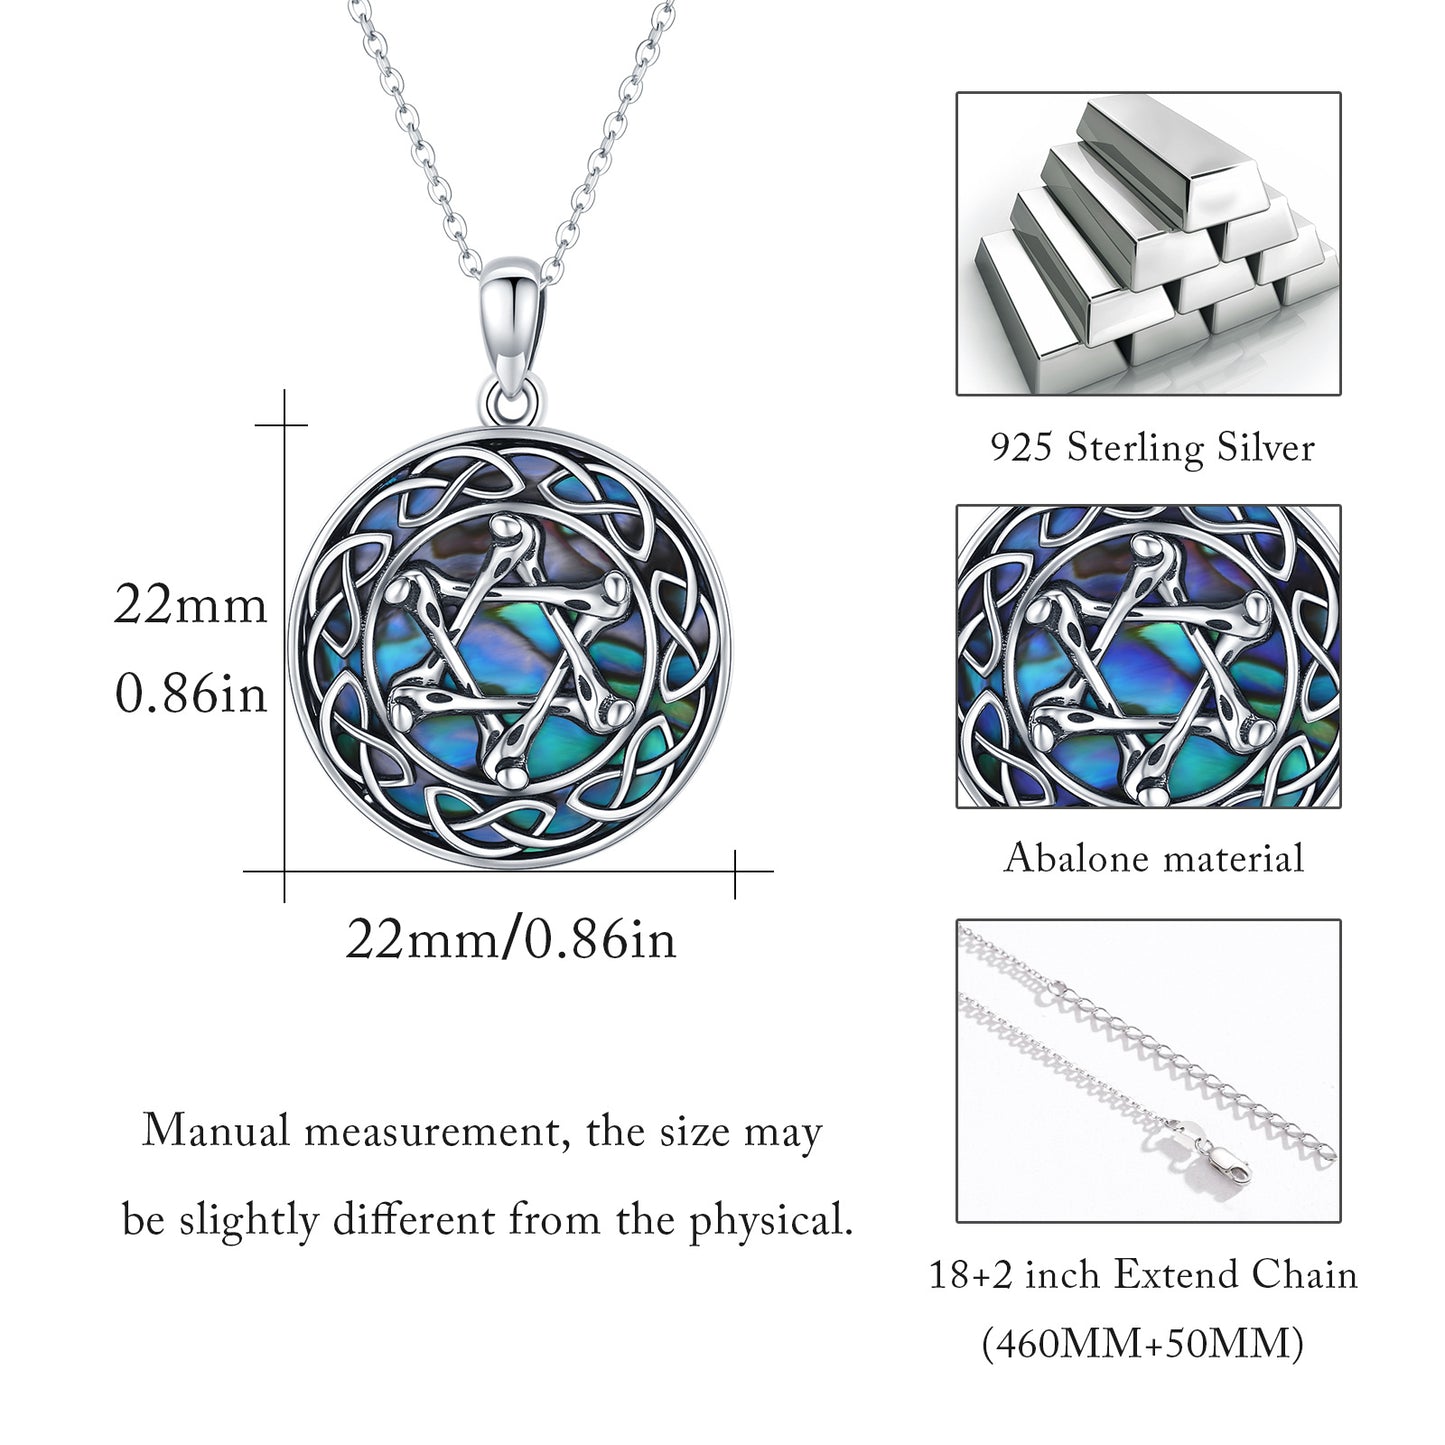 Celtic Knot Necklace 925 Sterling Silver Abalone Star of David Pendant Necklace for Women Jewish Amulet Jewellery Accessory